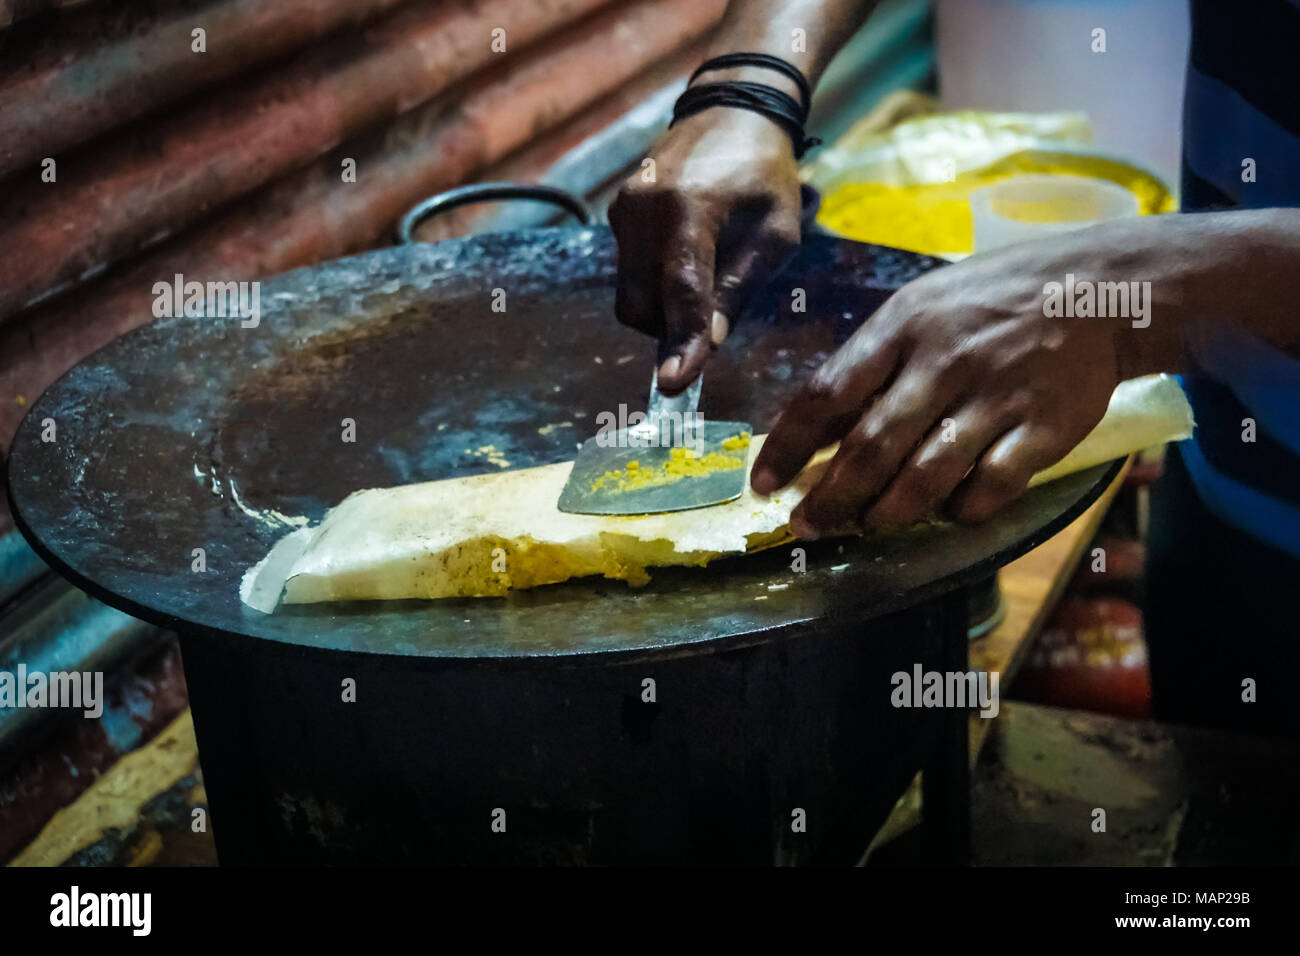 chicken and egg kathi rolls with onions being prepared on a black surface with green limes by a street food vendor in Kolkata, West Bengal, India. uns Stock Photo